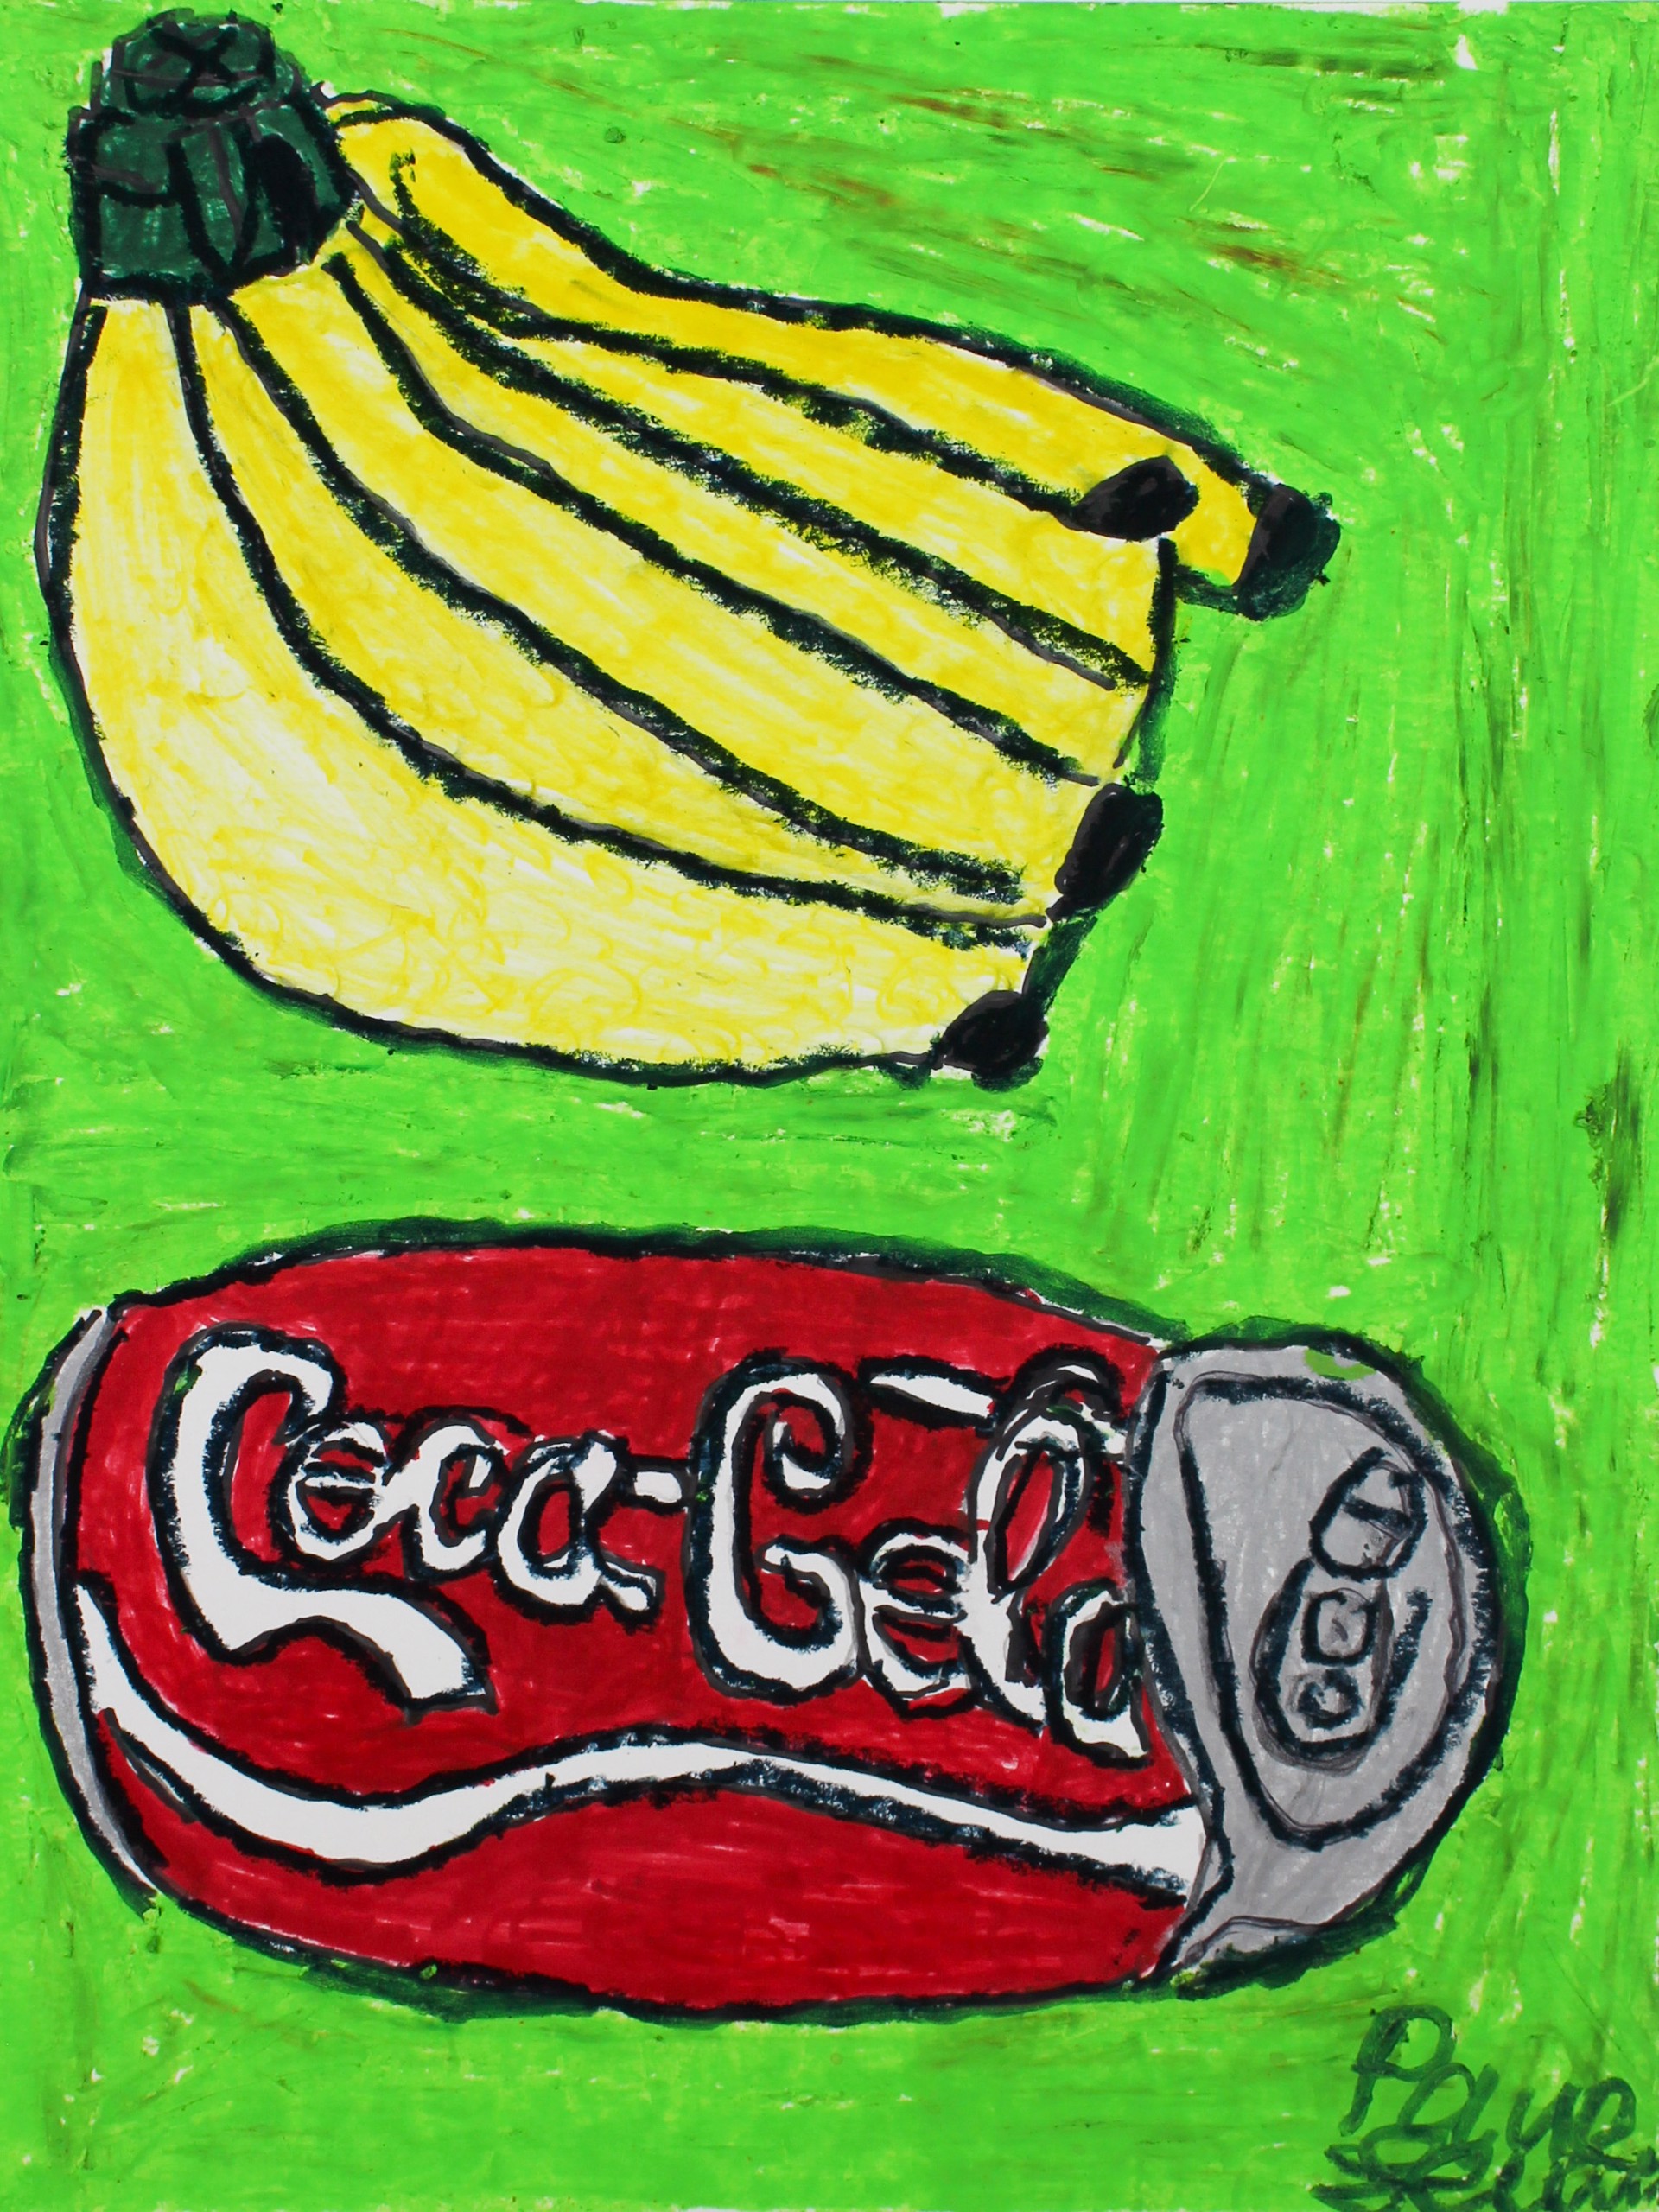 Banana and Coca Cola by Paul Lewis